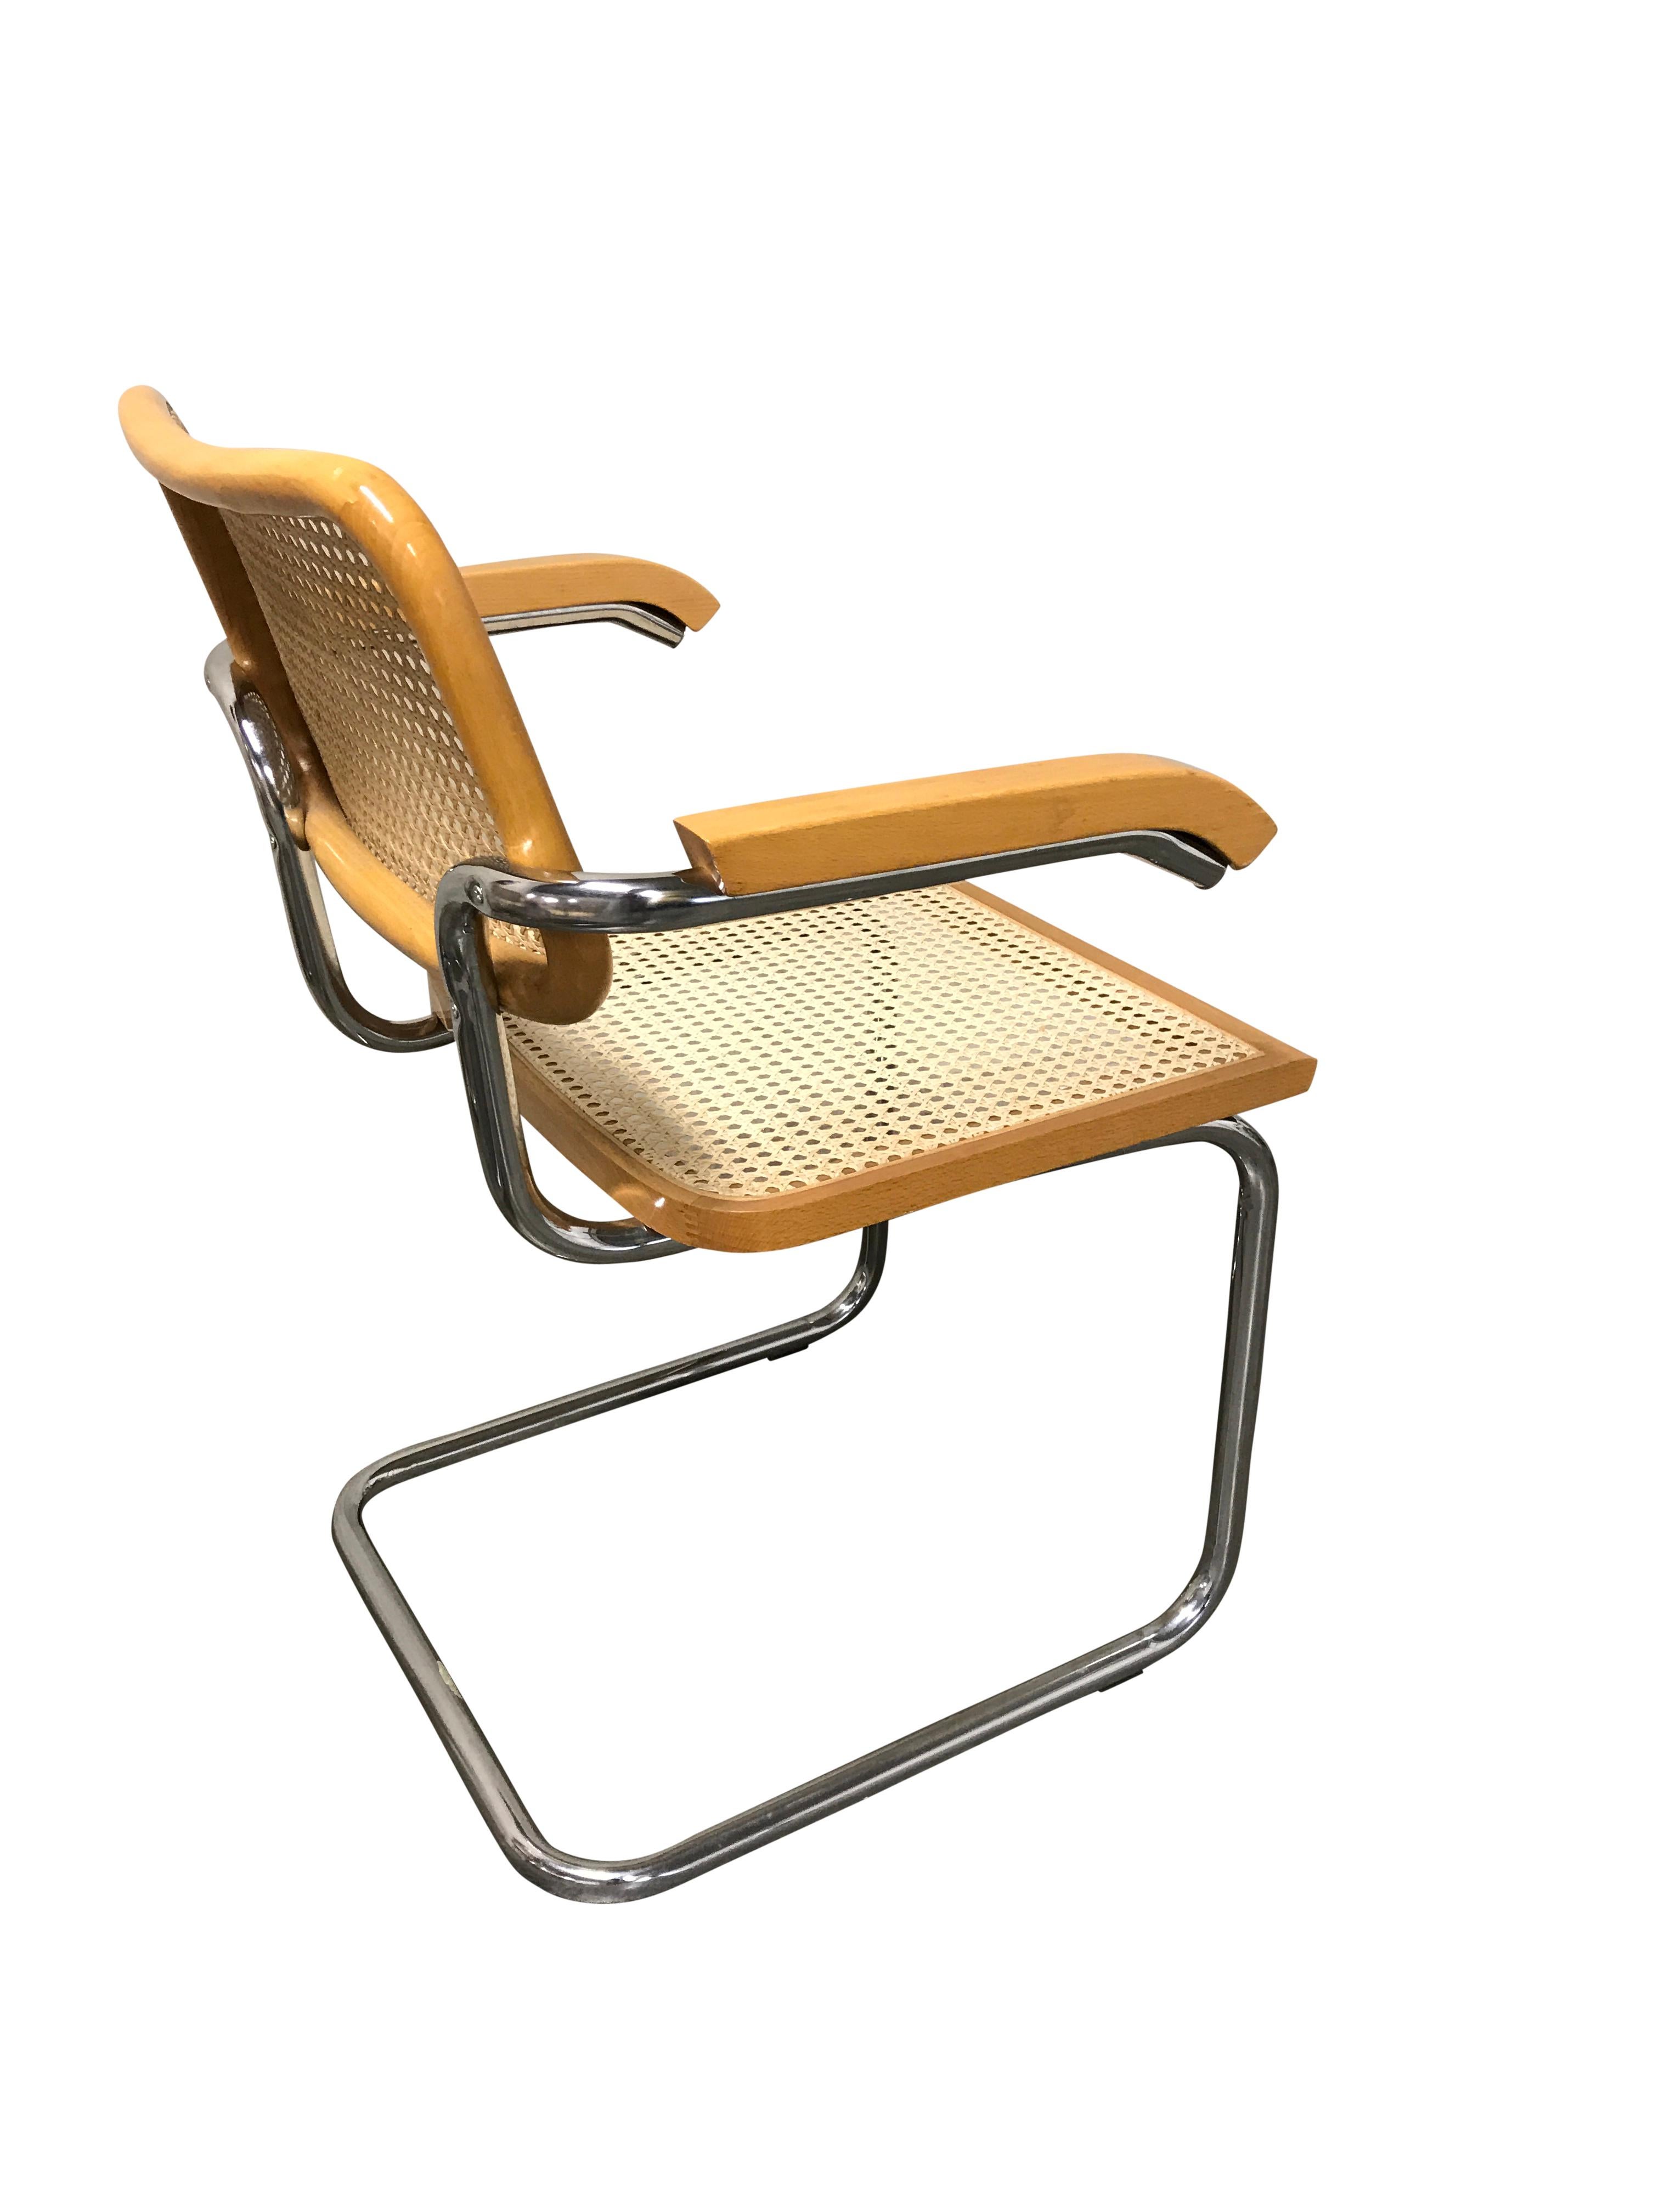 Late 20th Century Vintage Marcel Breuer Cesca Chairs, Made in Italy, 1970s